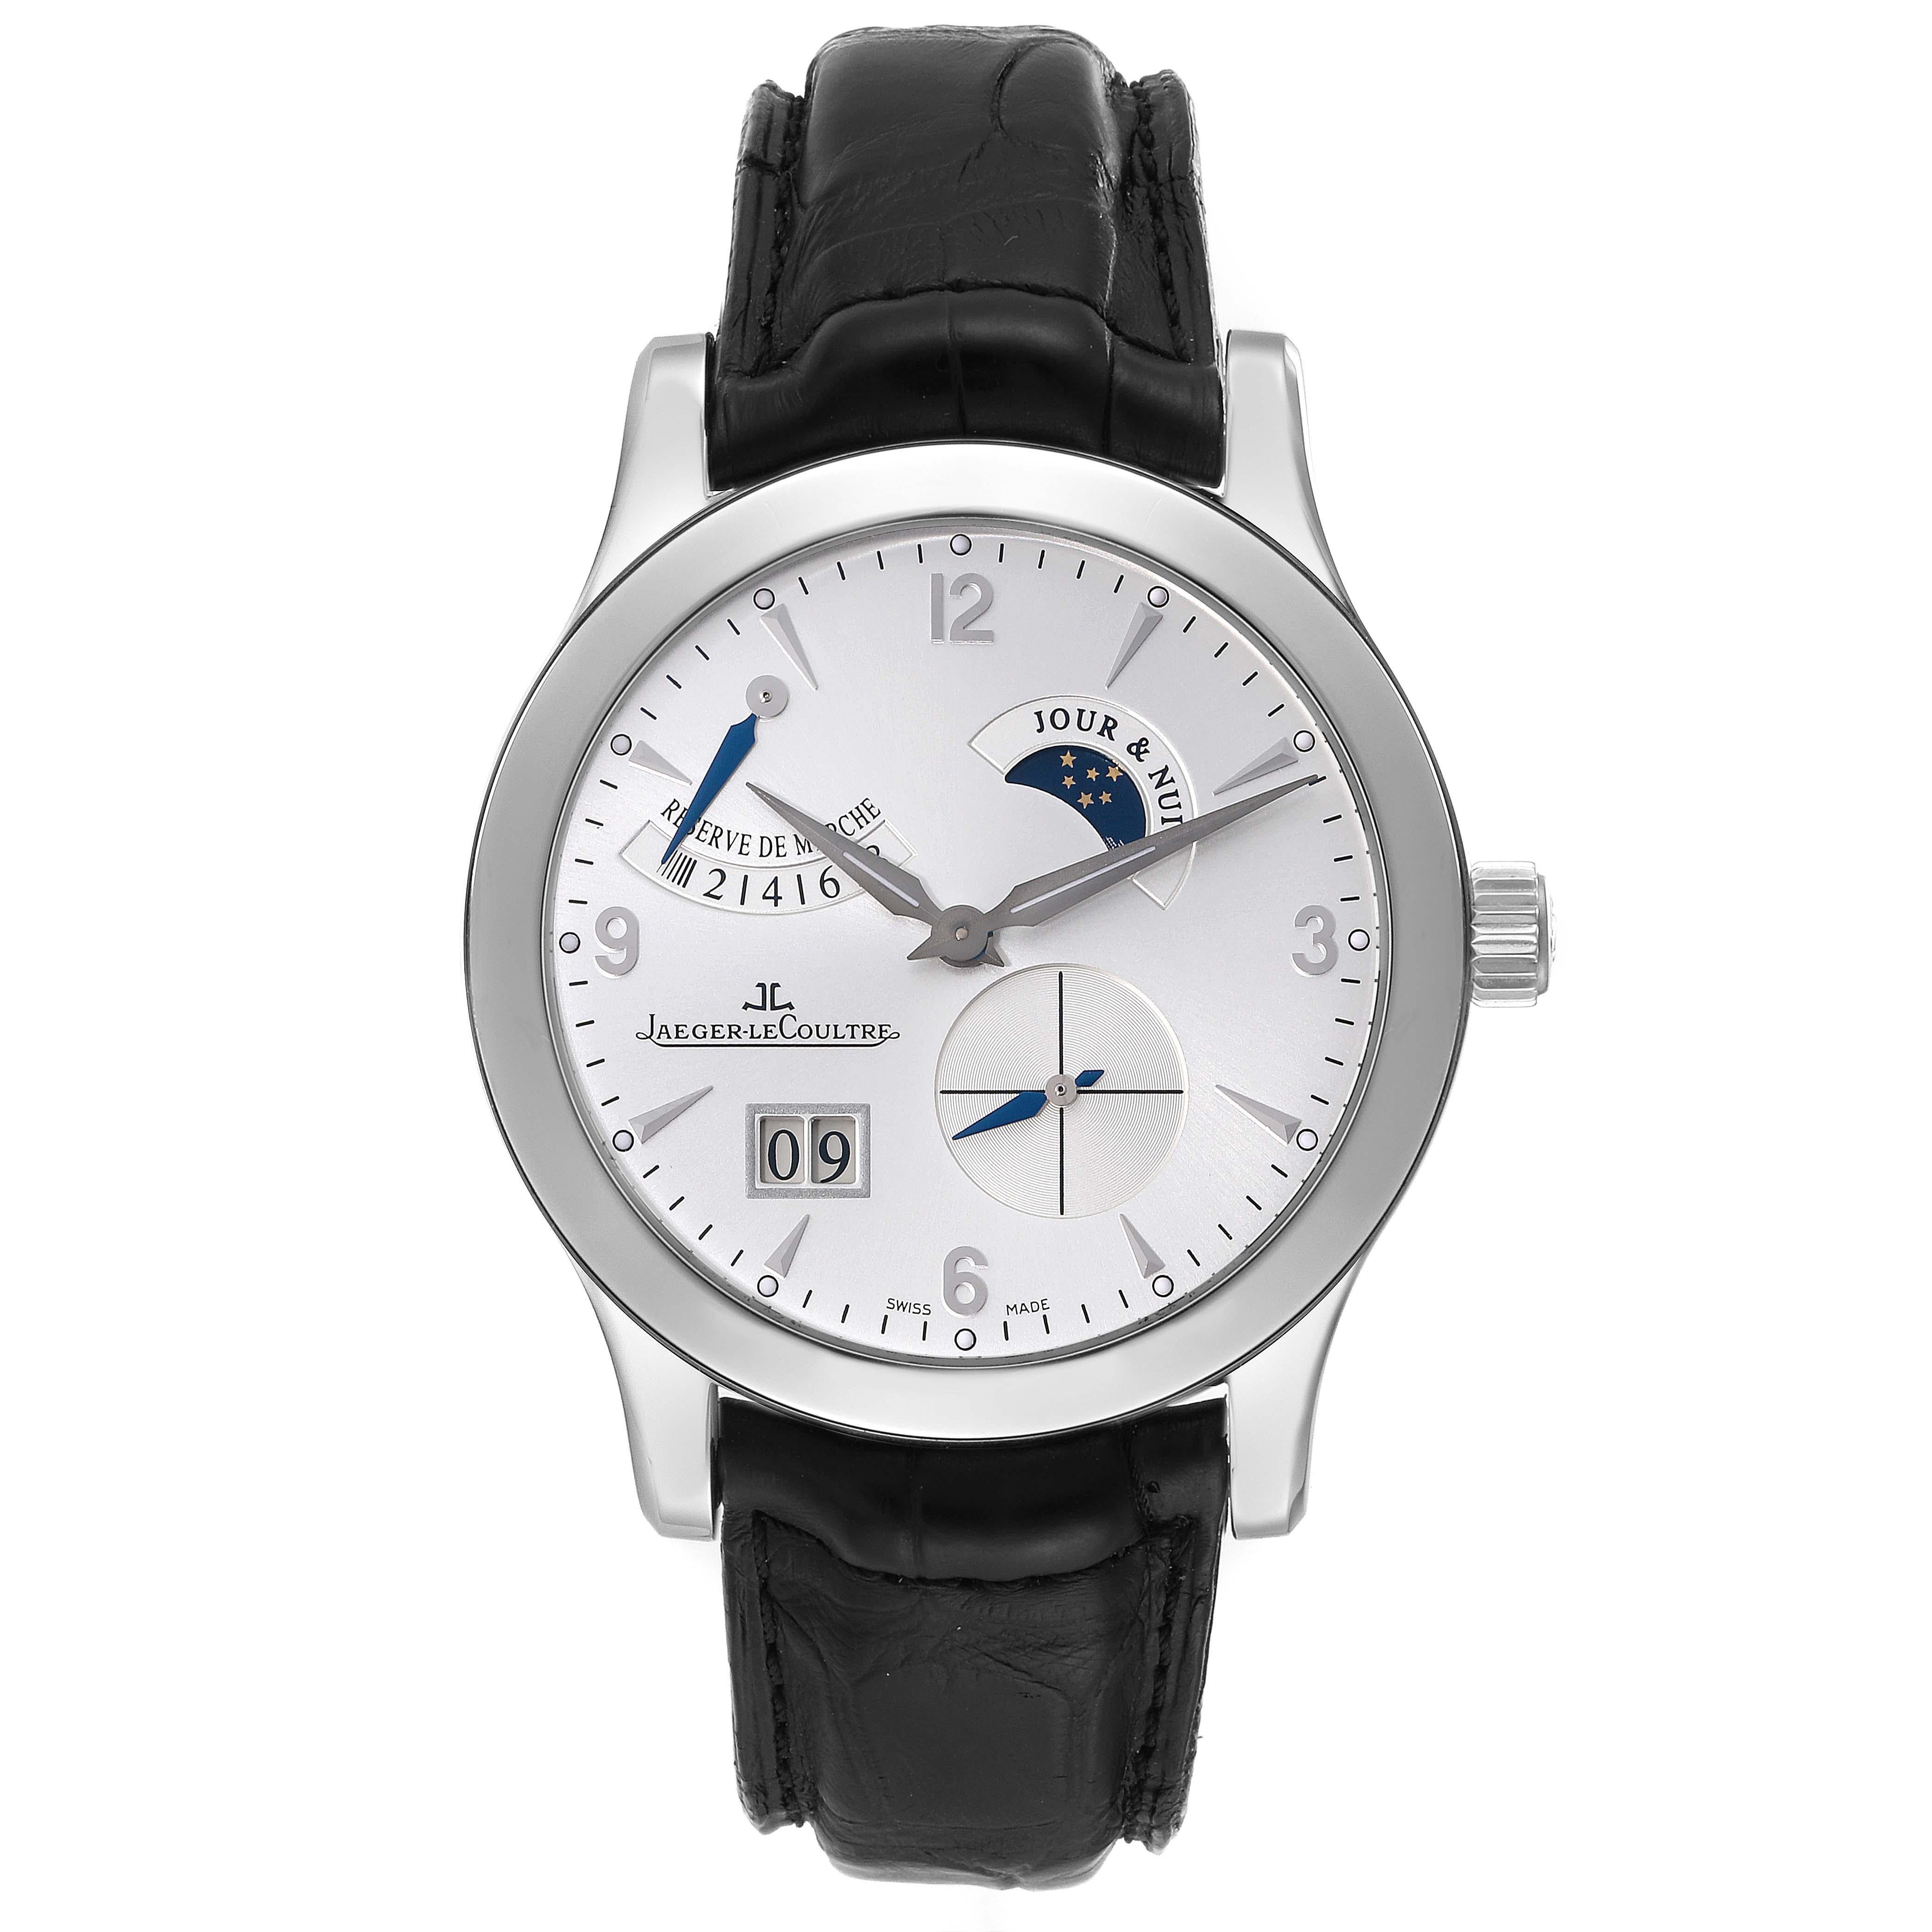 Jaeger Lecoultre Reserve De Marche Steel Mens Watch 146.8.17.S Q1608420. Self-winding automatic movement. Rhodium-plated, fausses cotes decoration, straight line lever escapement, monometallic balance adjusted to 6 positions, shock absorber